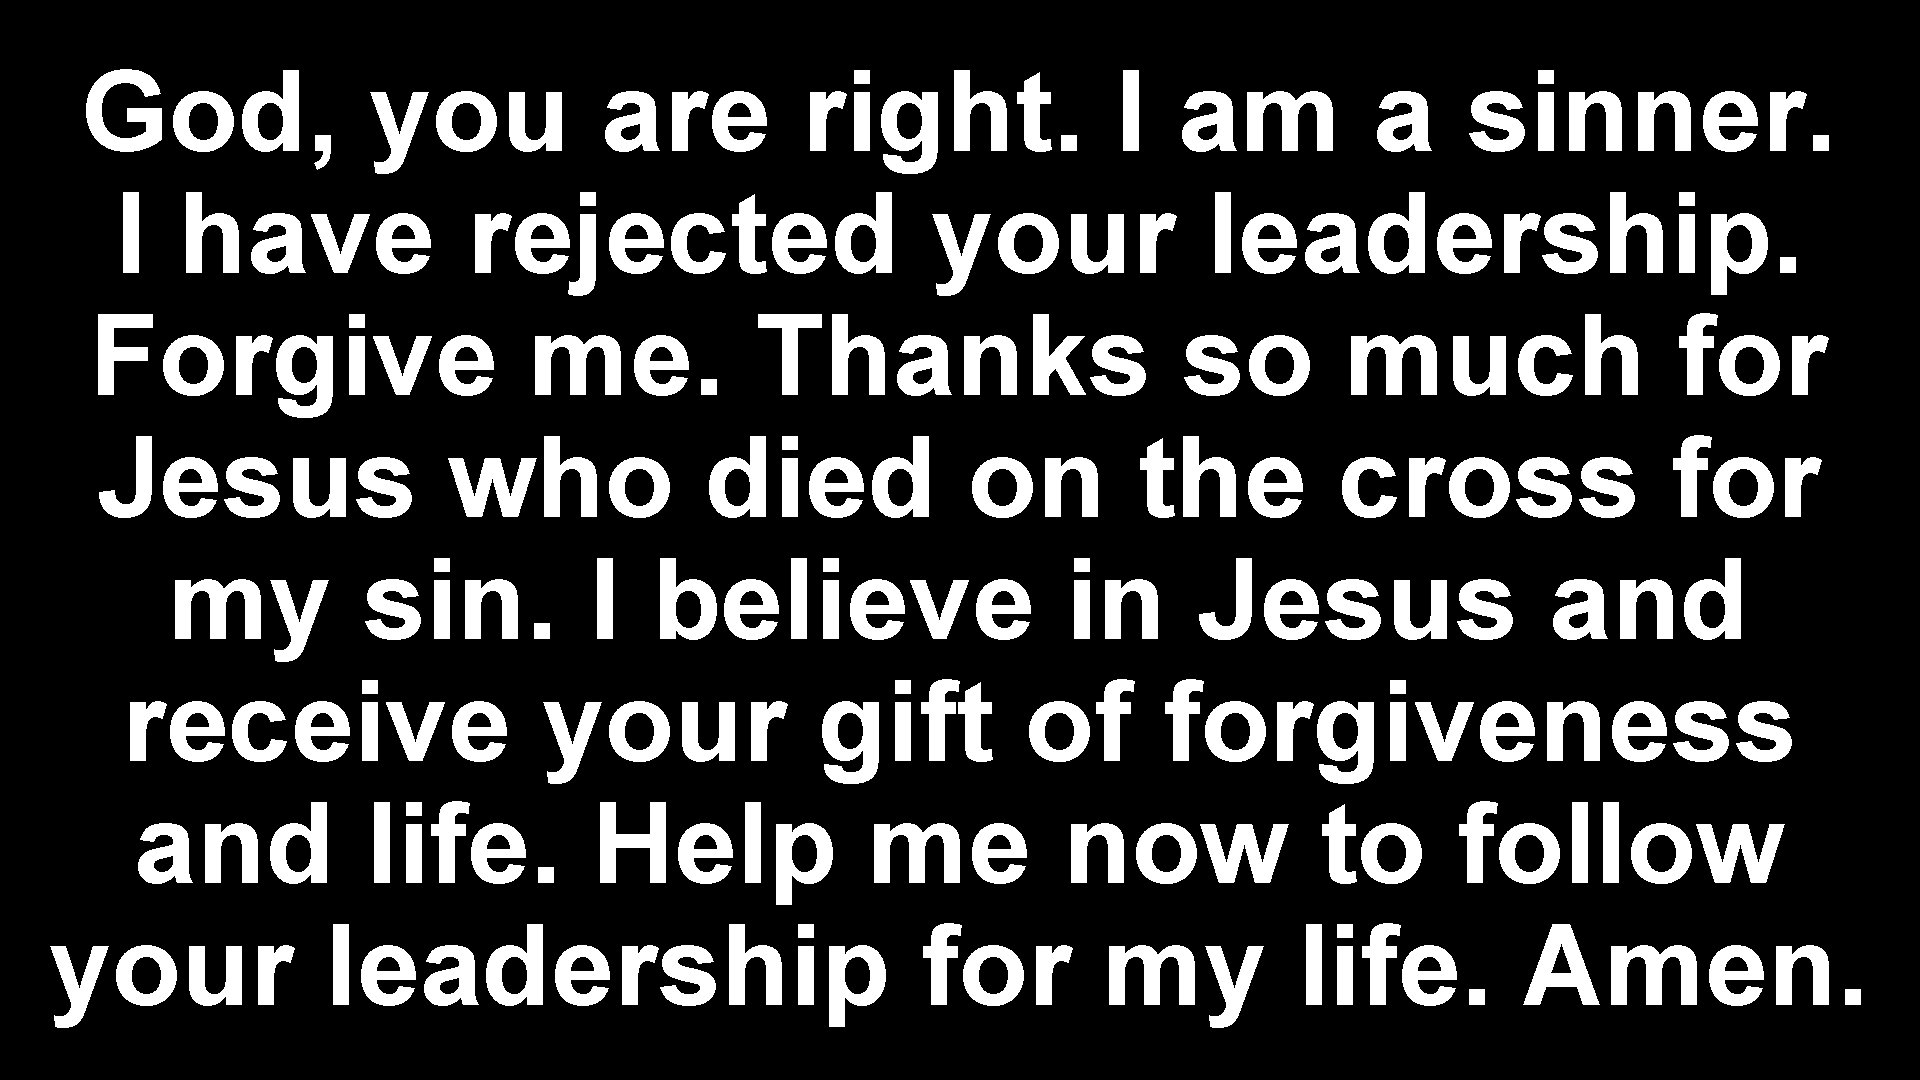 God, you are right. I am a sinner. I have rejected your leadership. Forgive